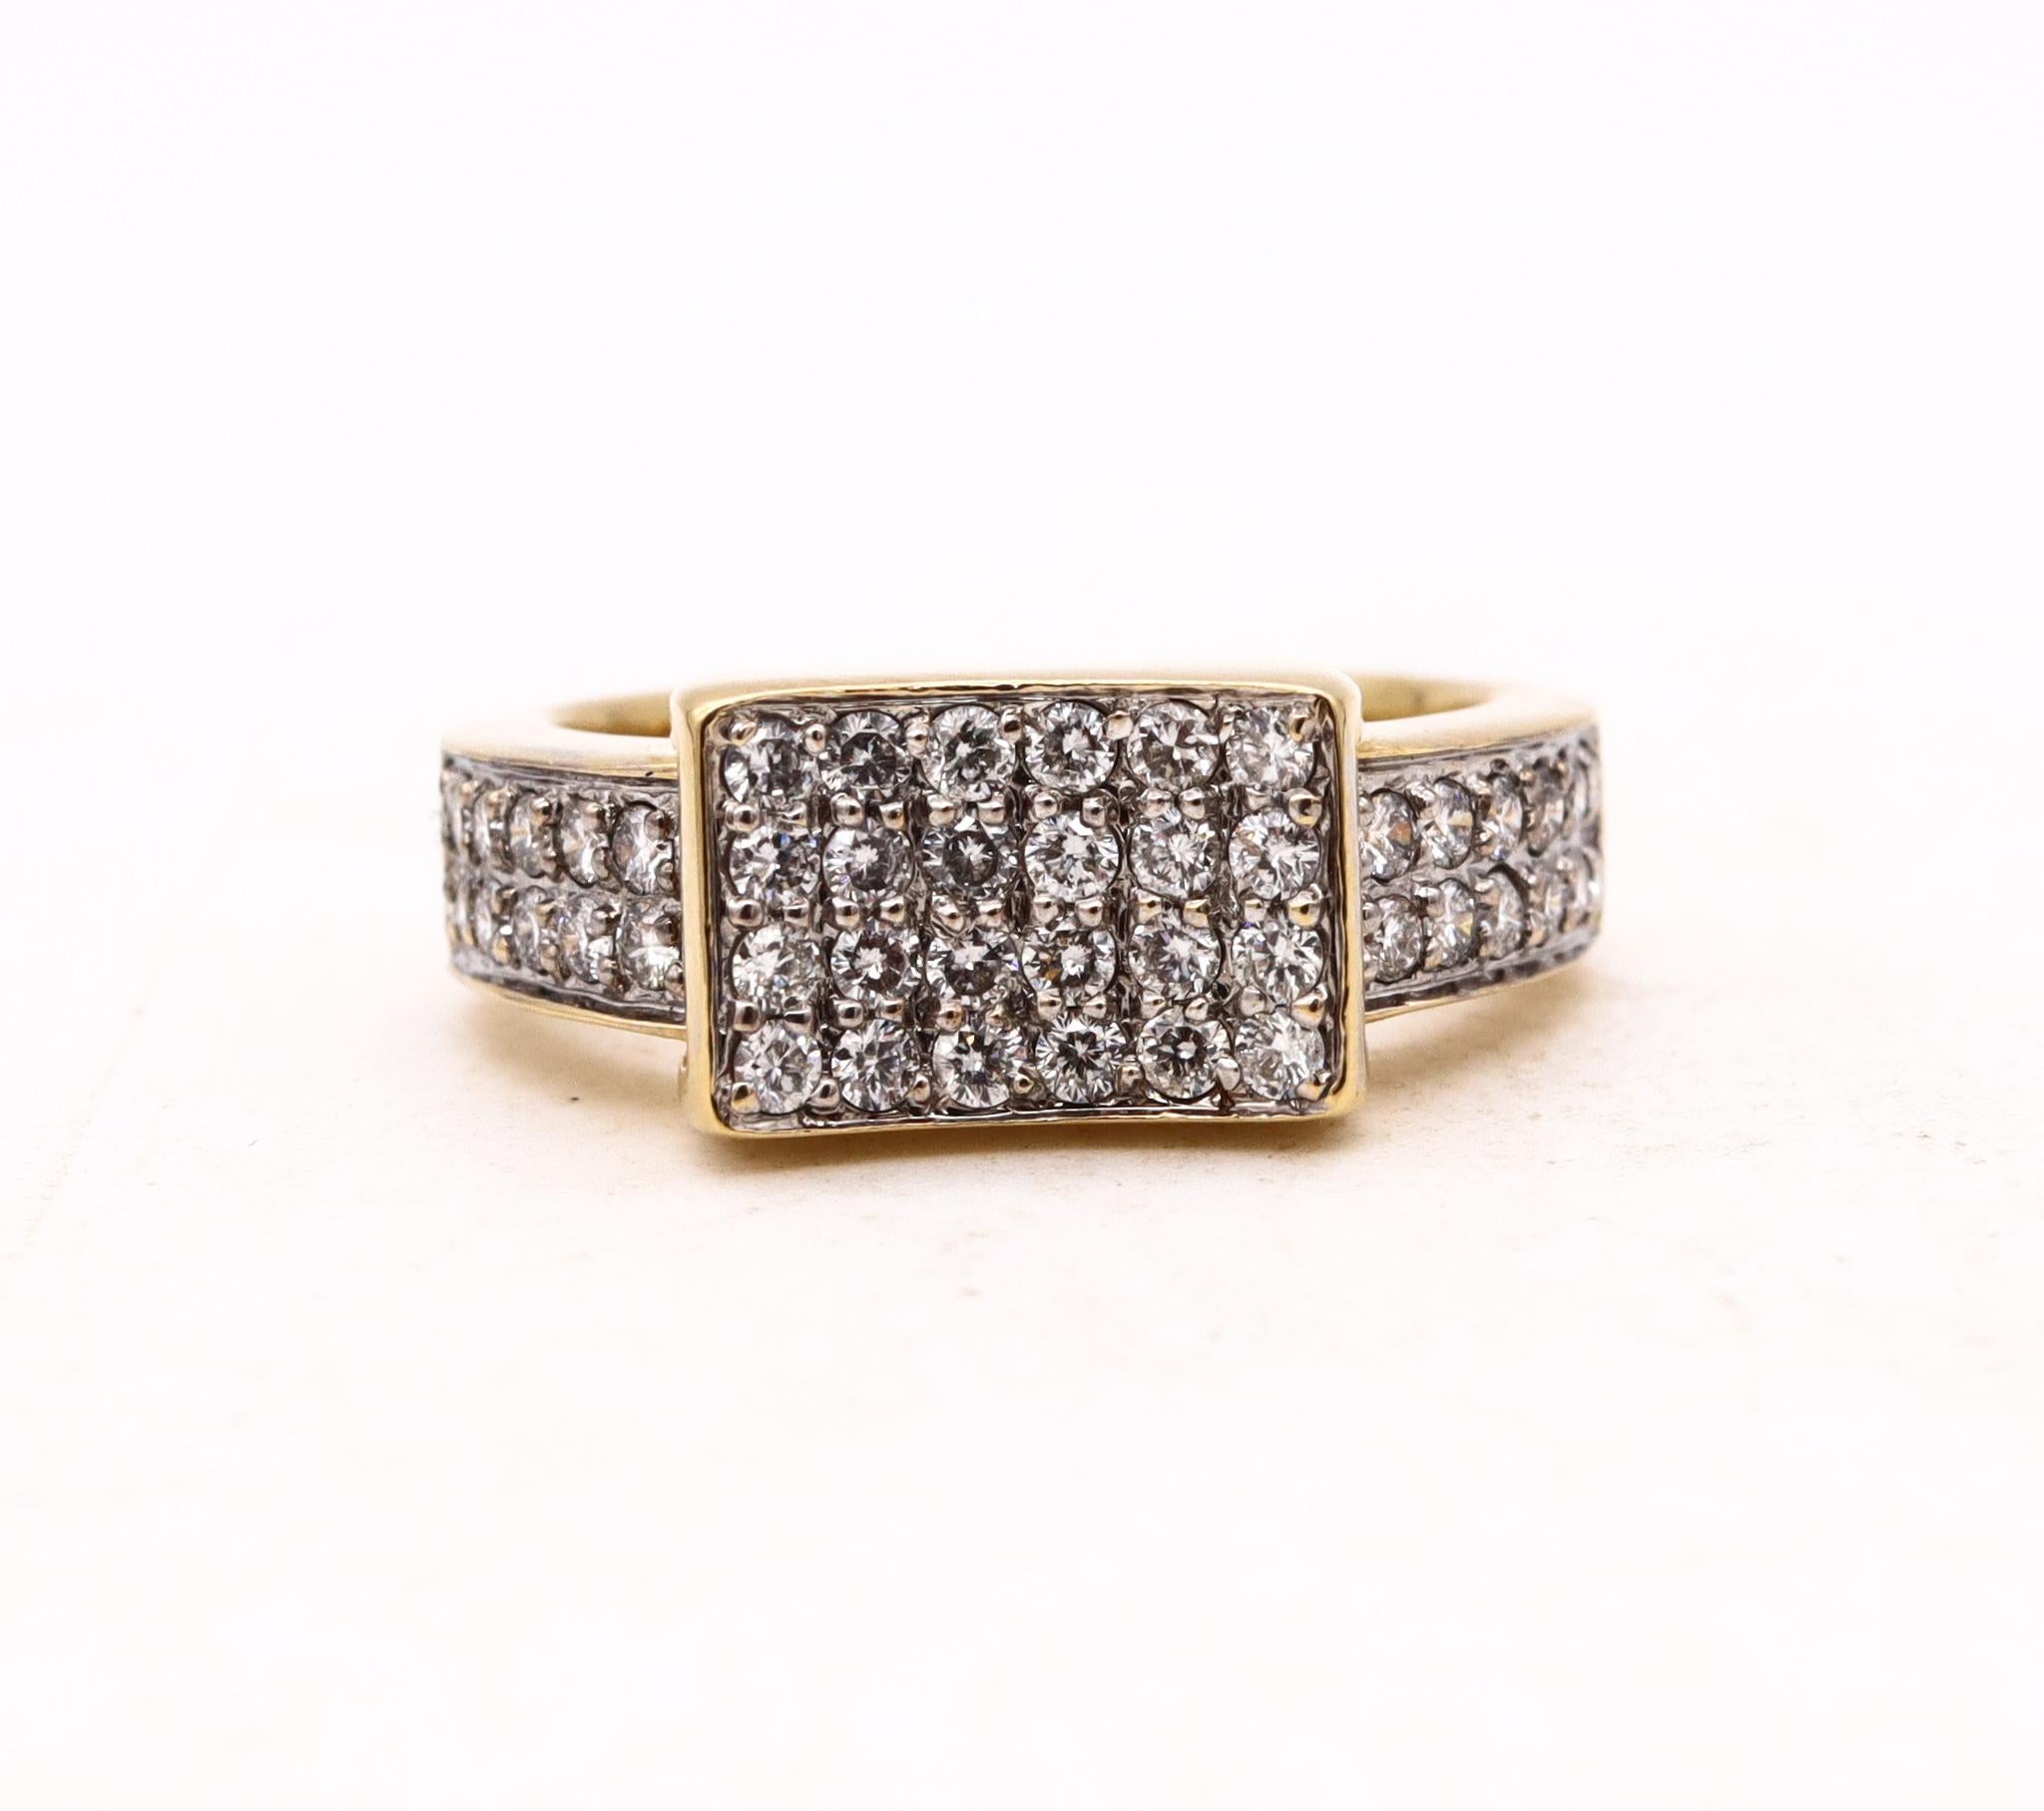 Italian Modernist Geometric Ring in 18Kt Yellow Gold with 1.04 Cts VS Diamonds For Sale 4